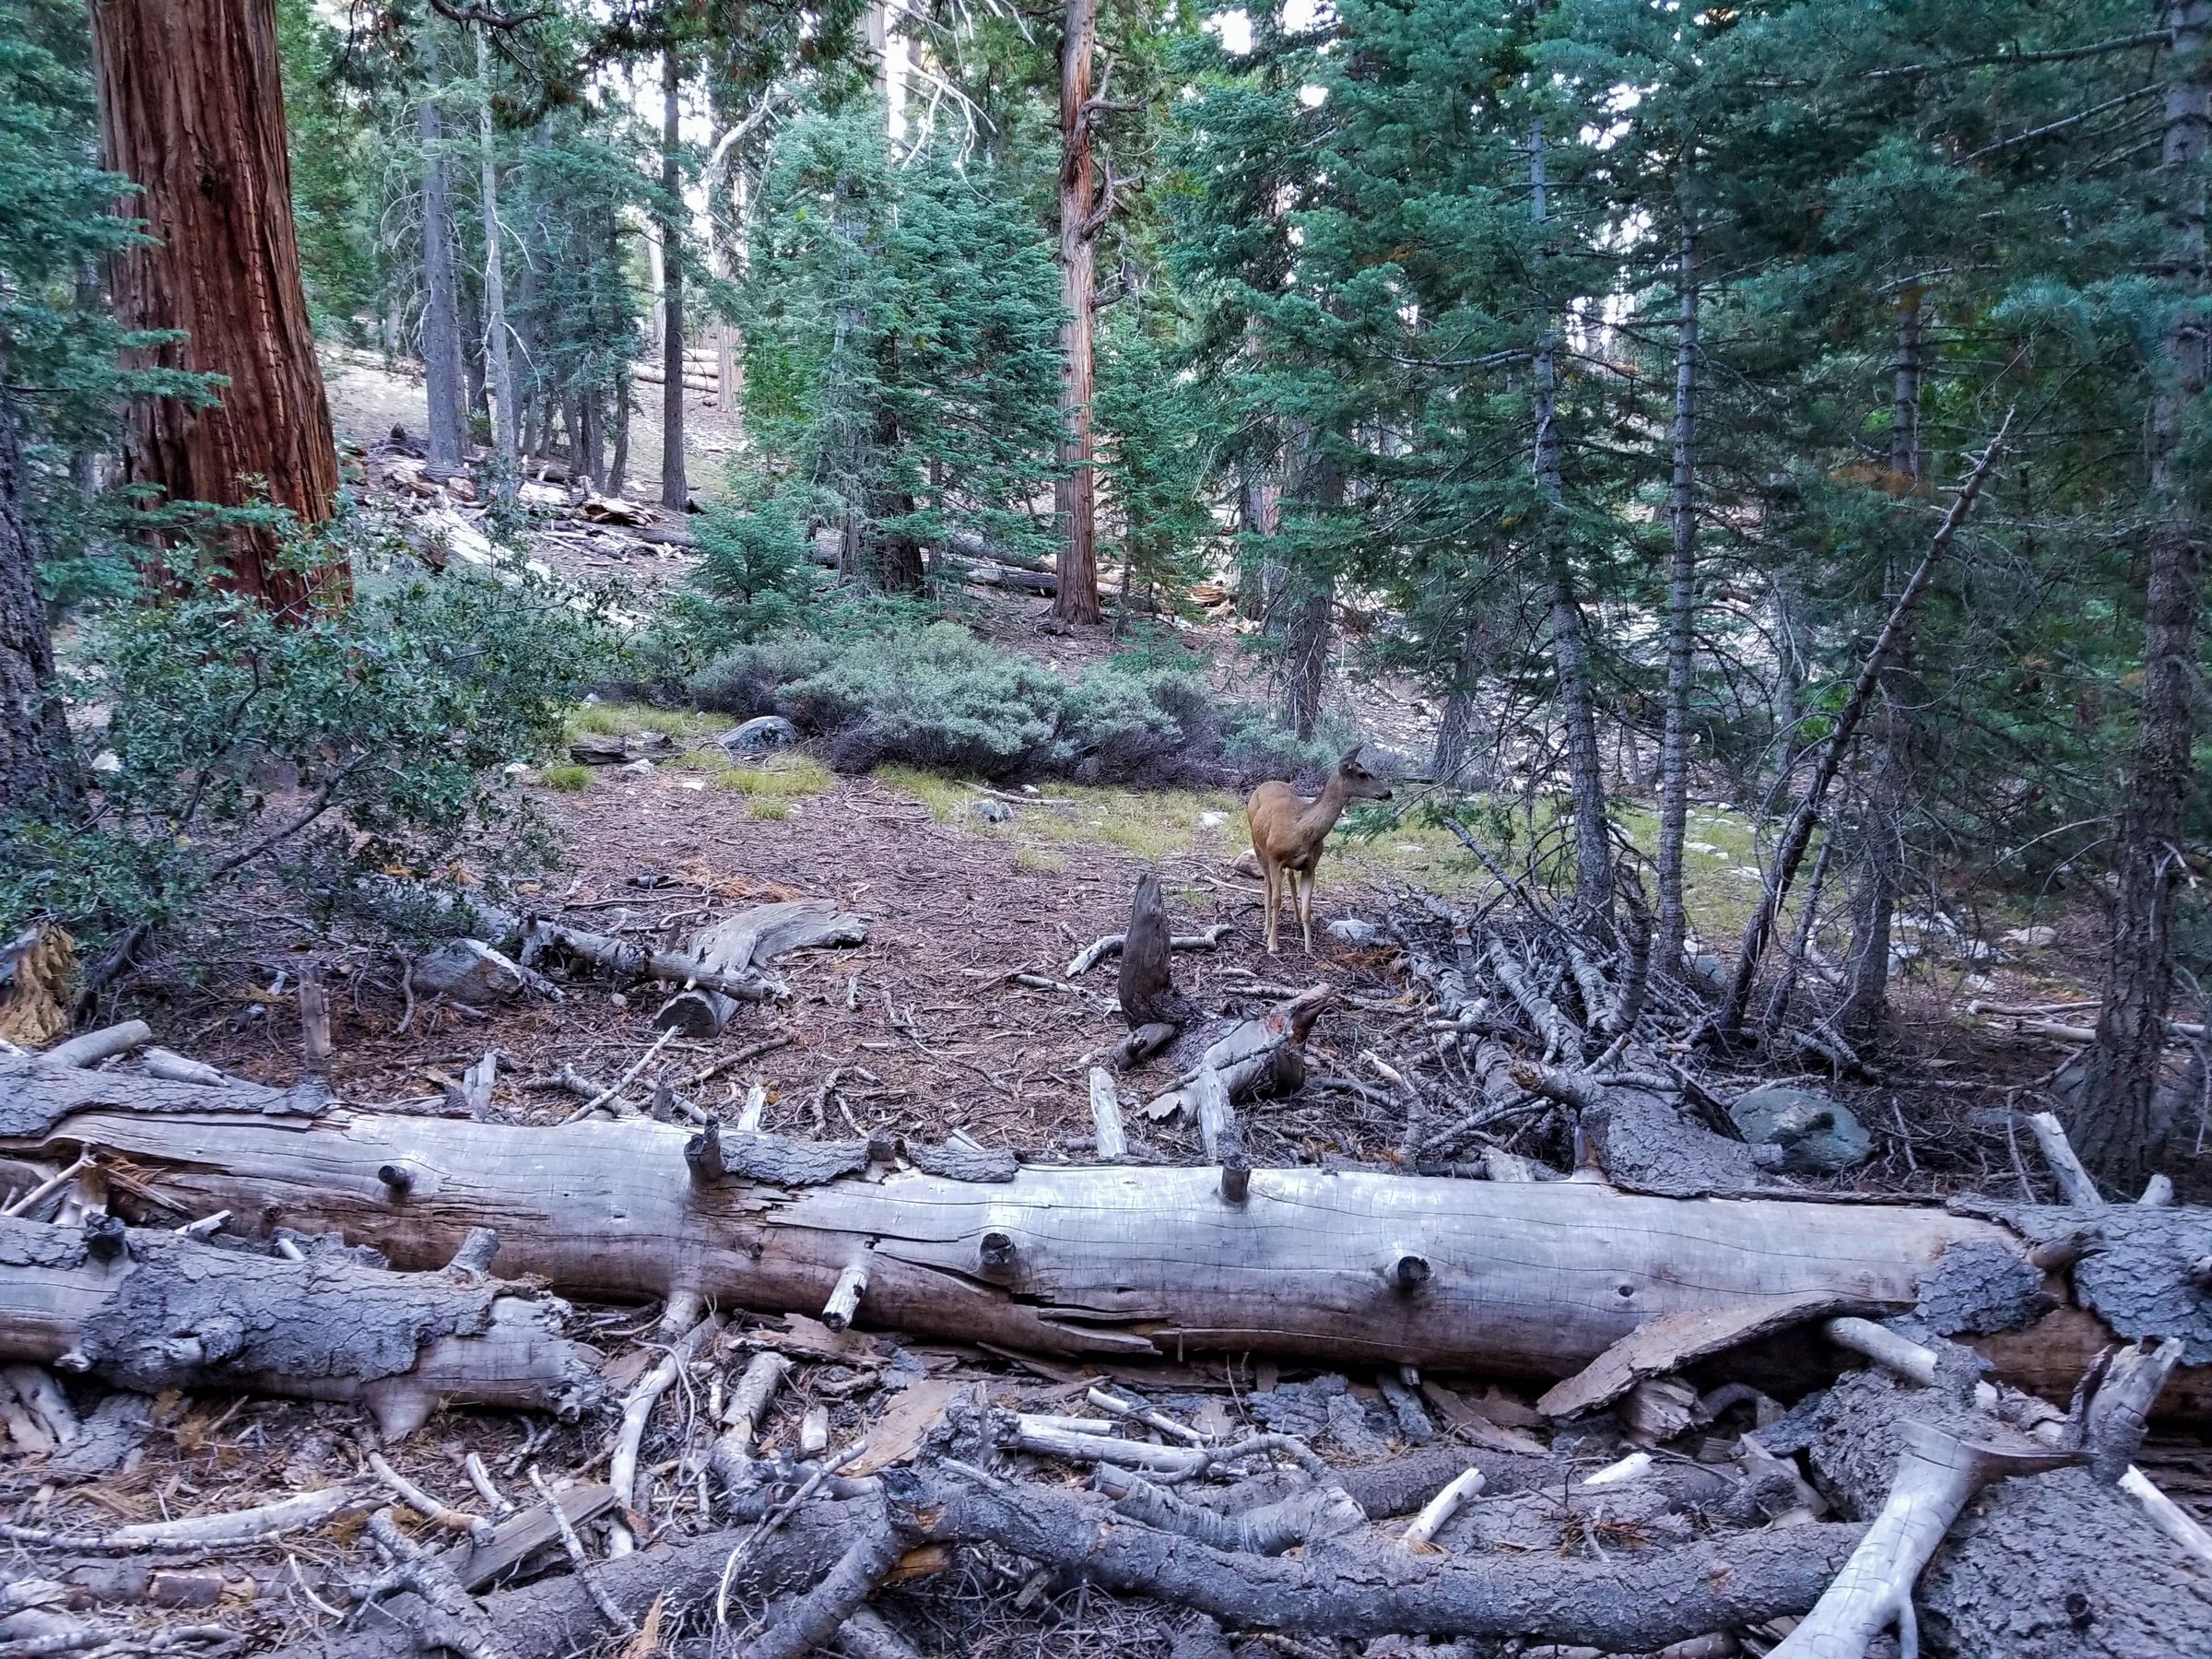 One of several deer seen along the trail